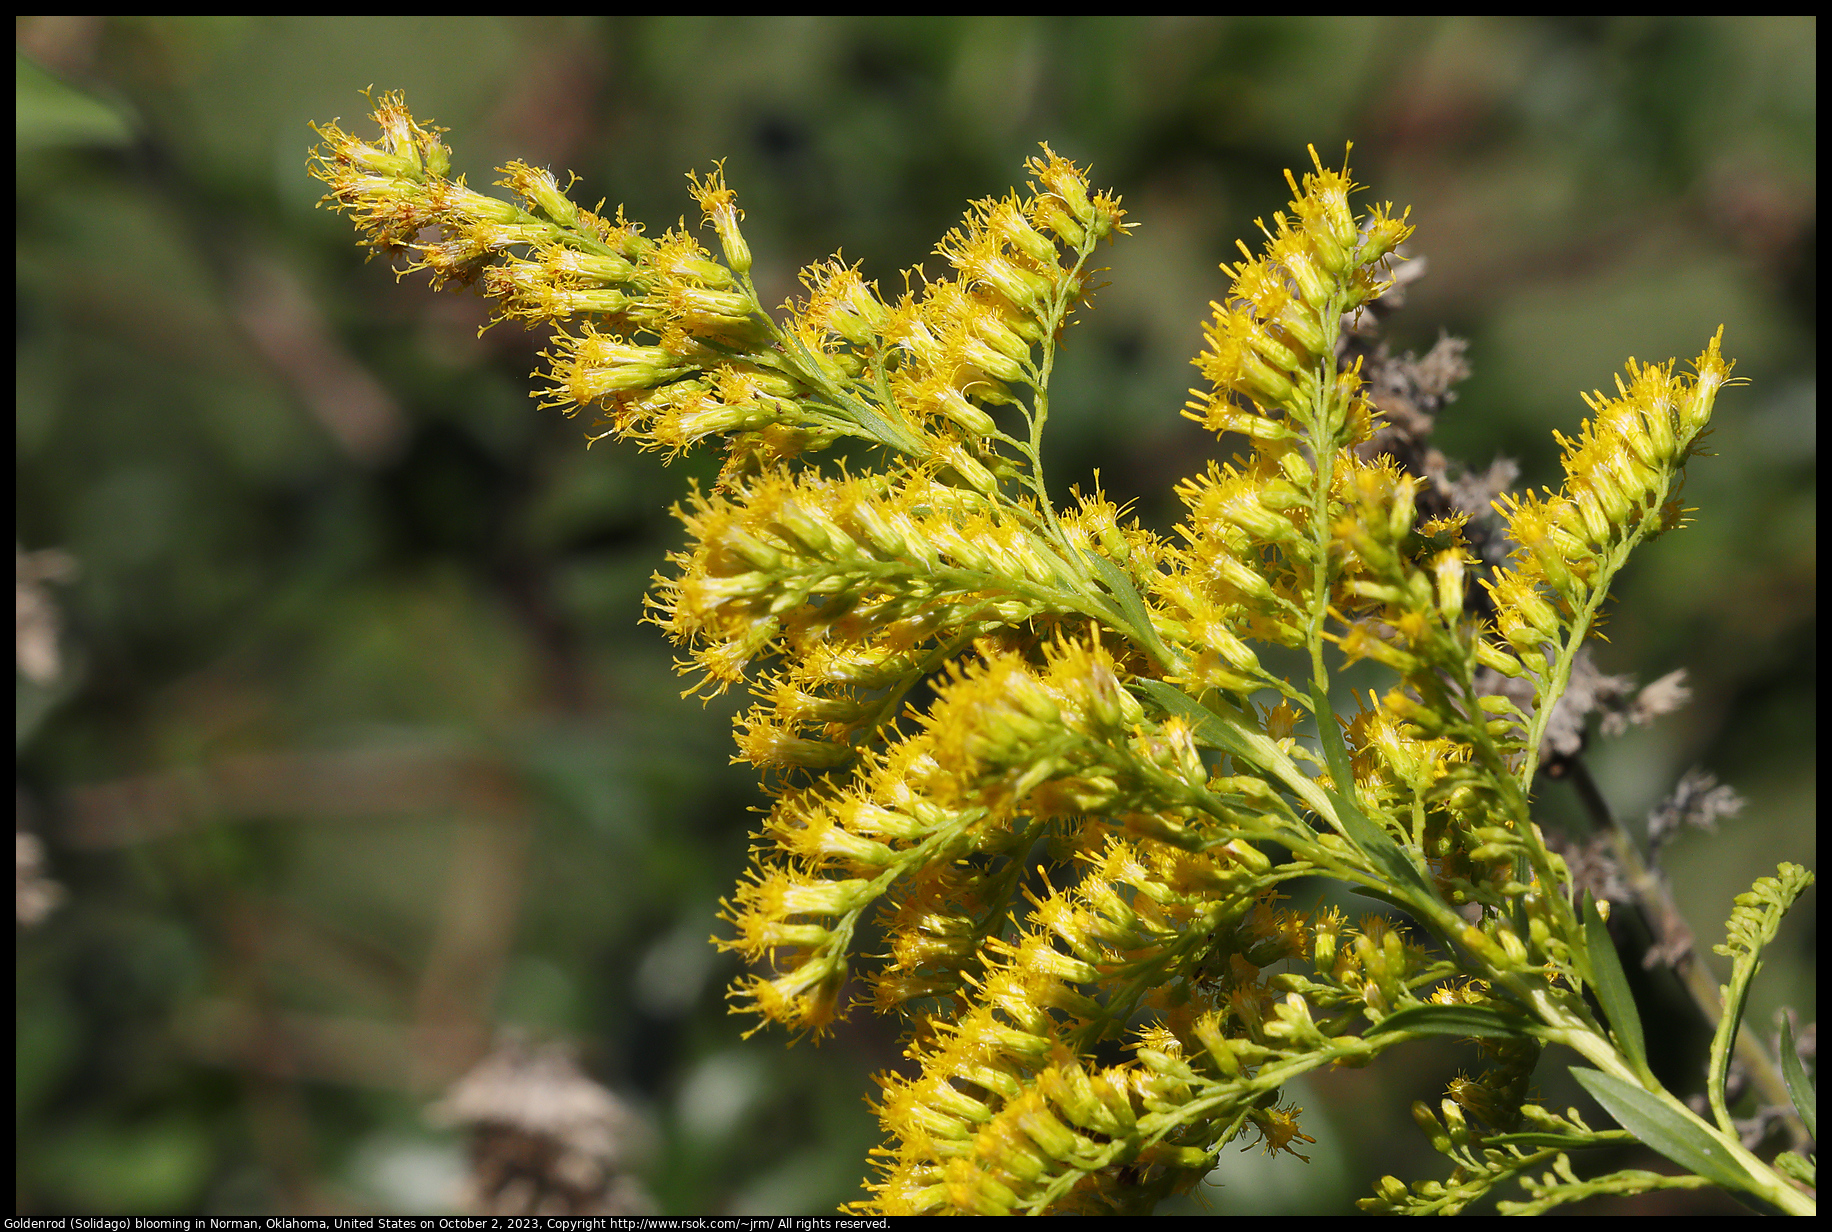 Goldenrod (Solidago) blooming in Norman, Oklahoma, United States, on October 2, 2023